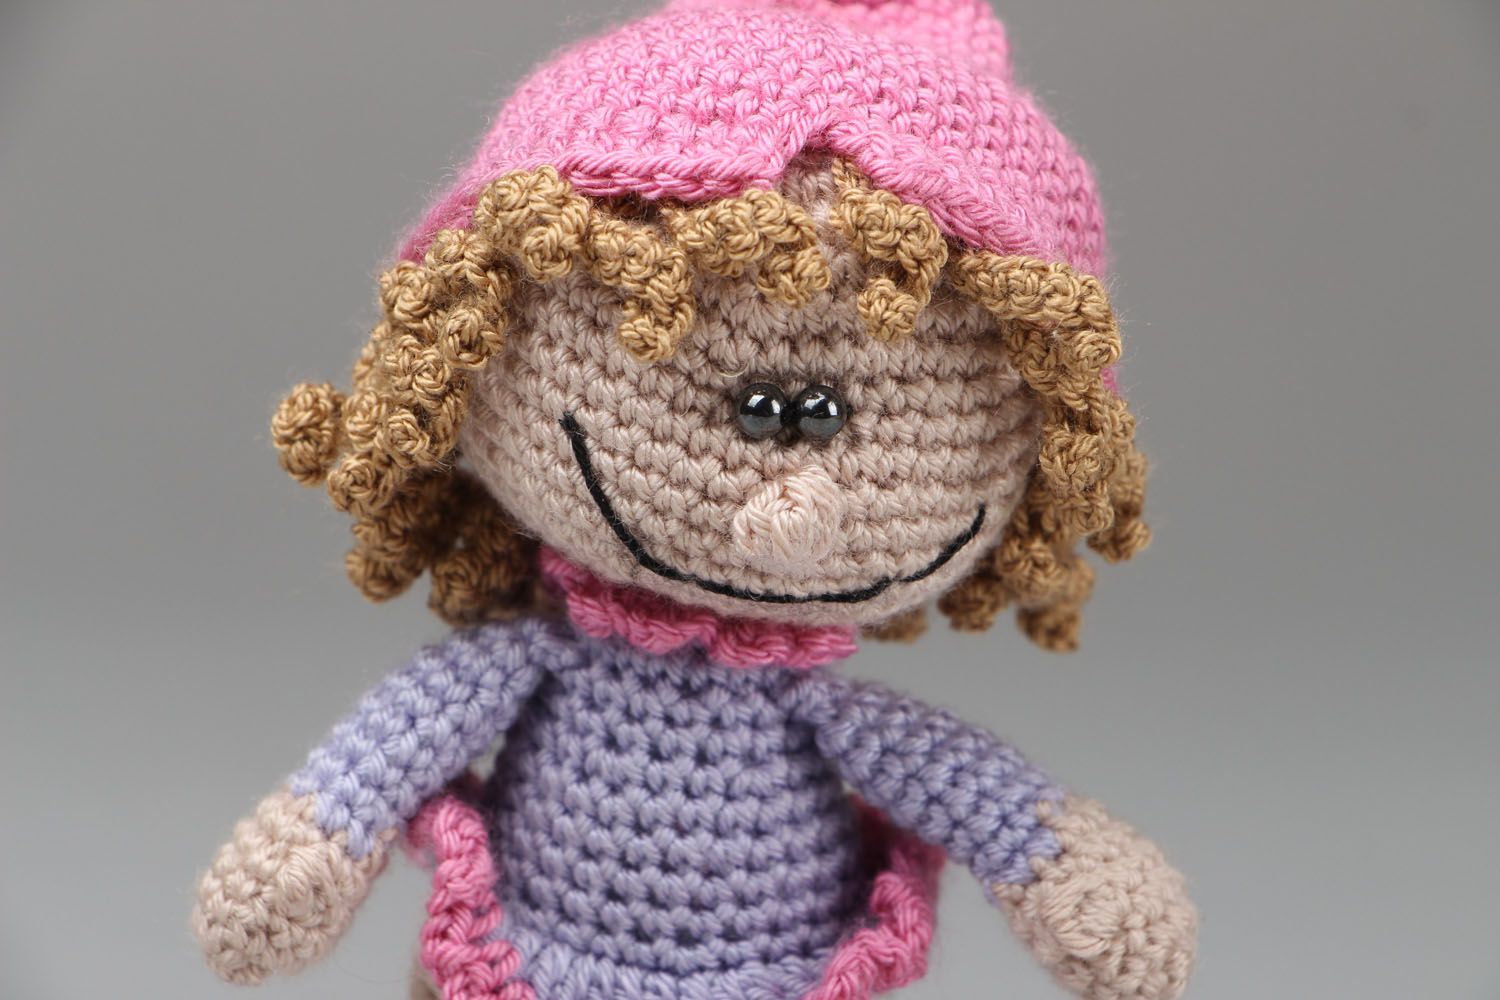 Author's crocheted toy photo 2